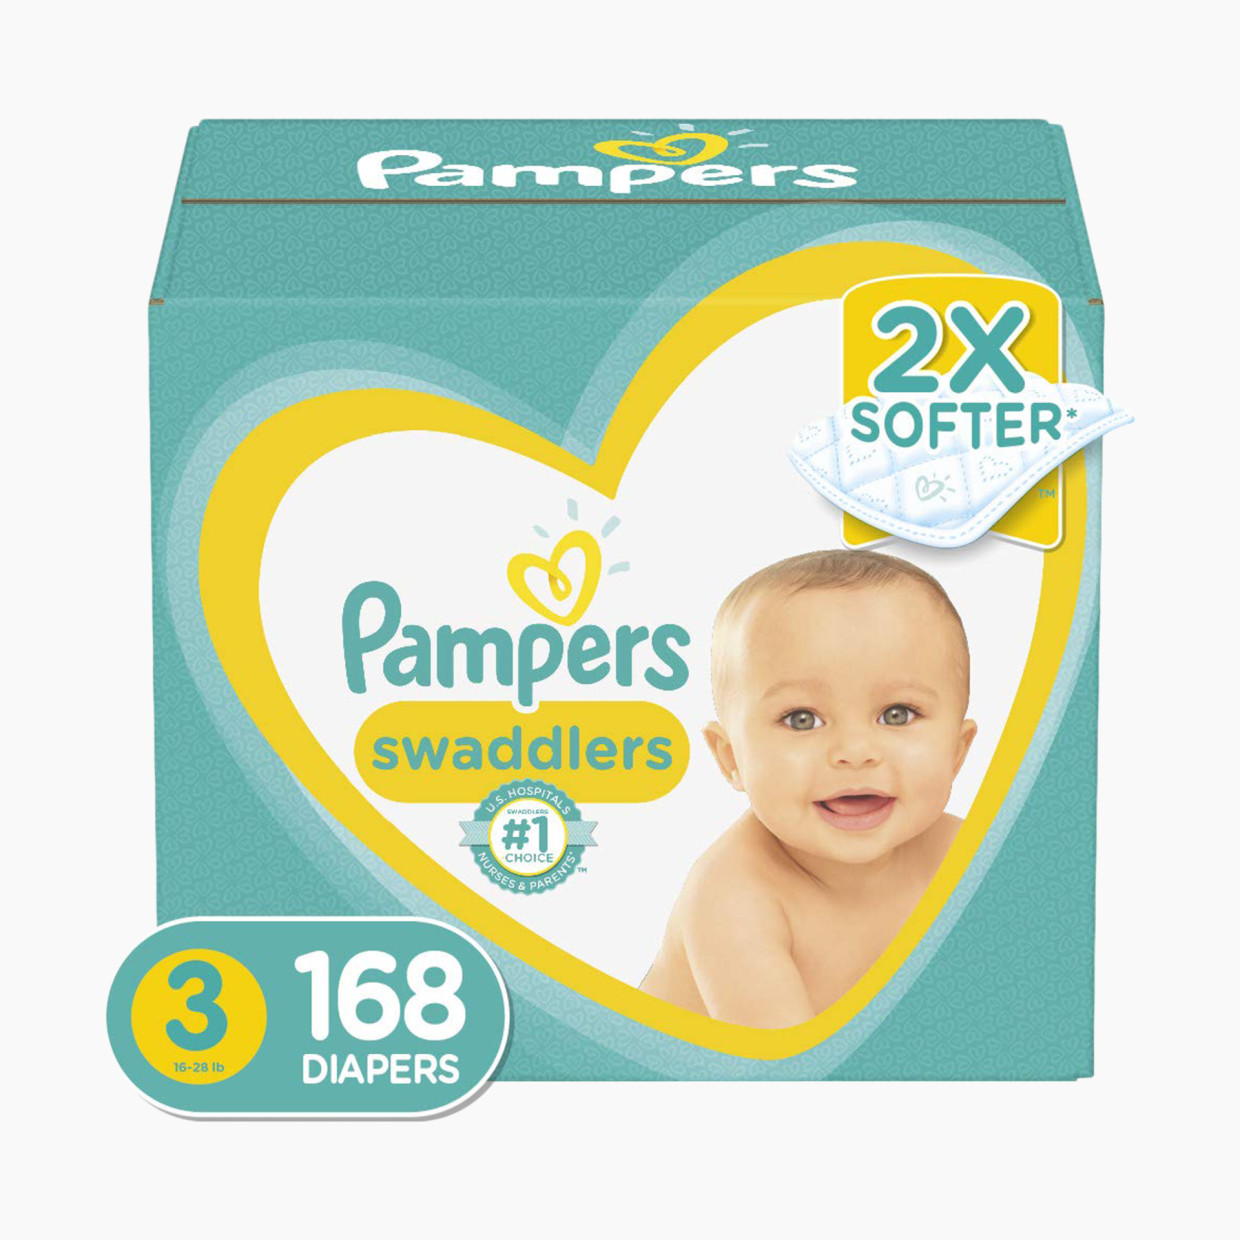 Pampers Swaddlers Diapers - Size 3 (168 Count).